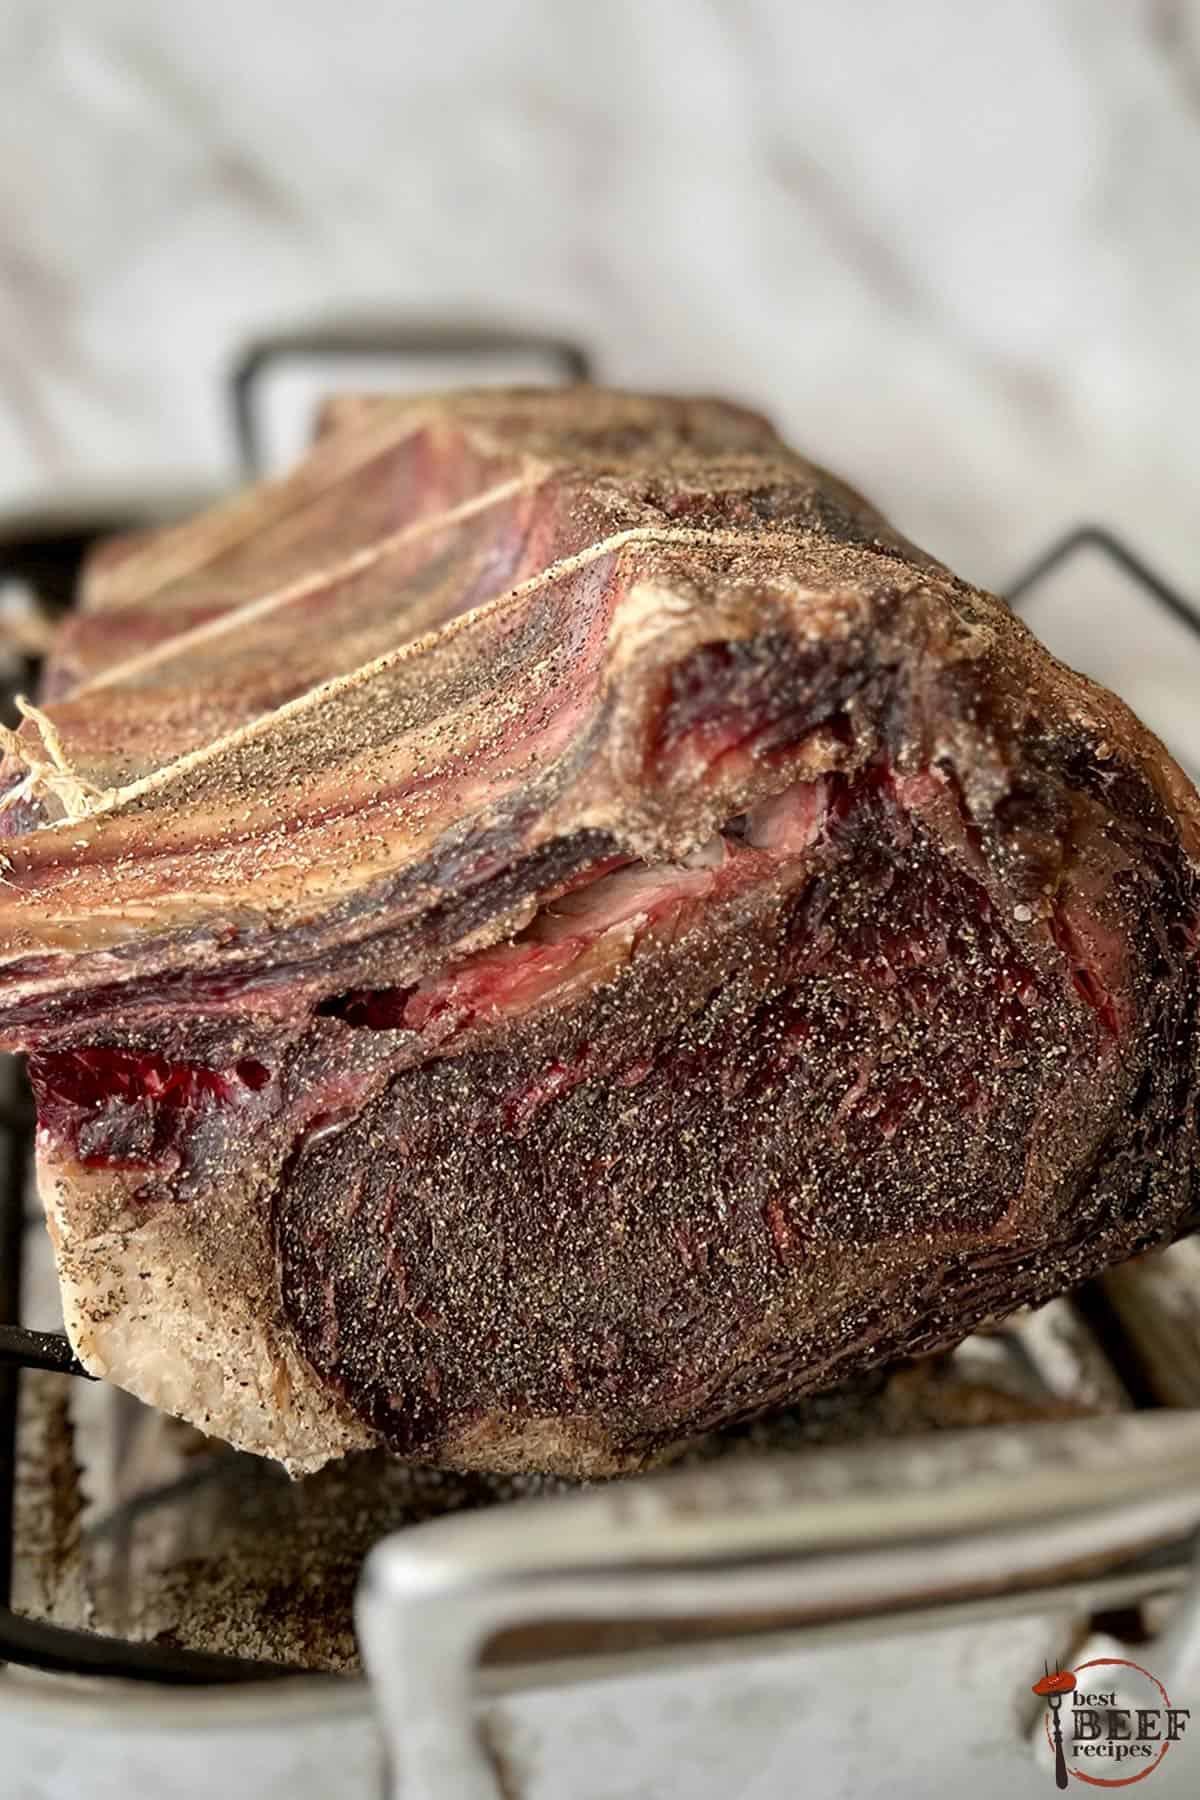 dry aged prime rib on a rack to show darkened colors